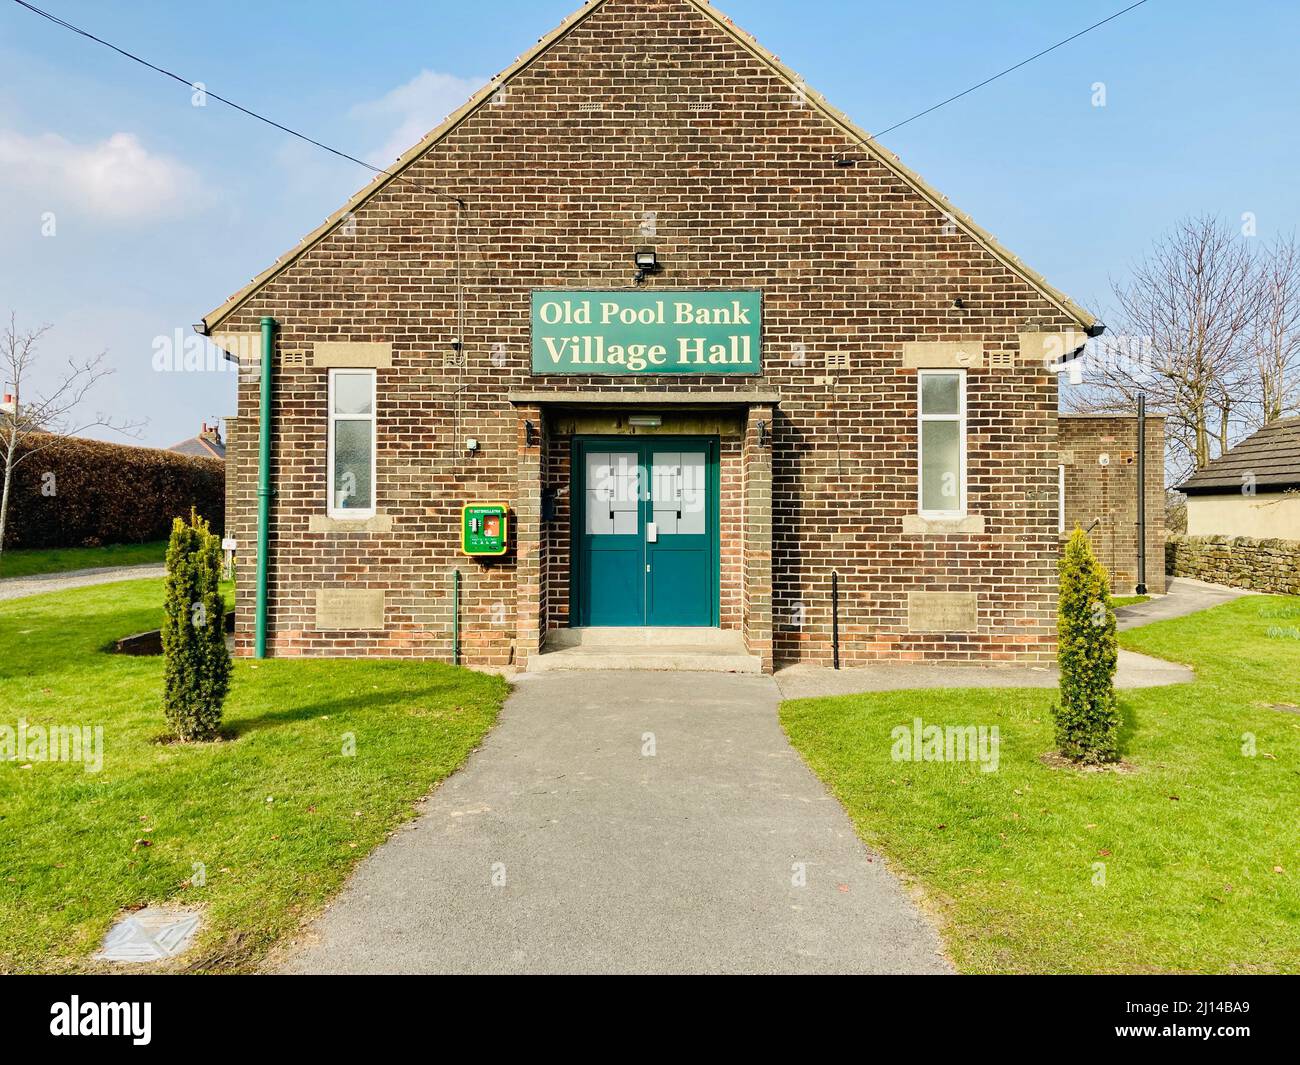 Old Pool Bank Village Hall, part of the hamlet of Old Pool Bank, West Yorkshire, and the meeting place of the parish council. Stock Photo